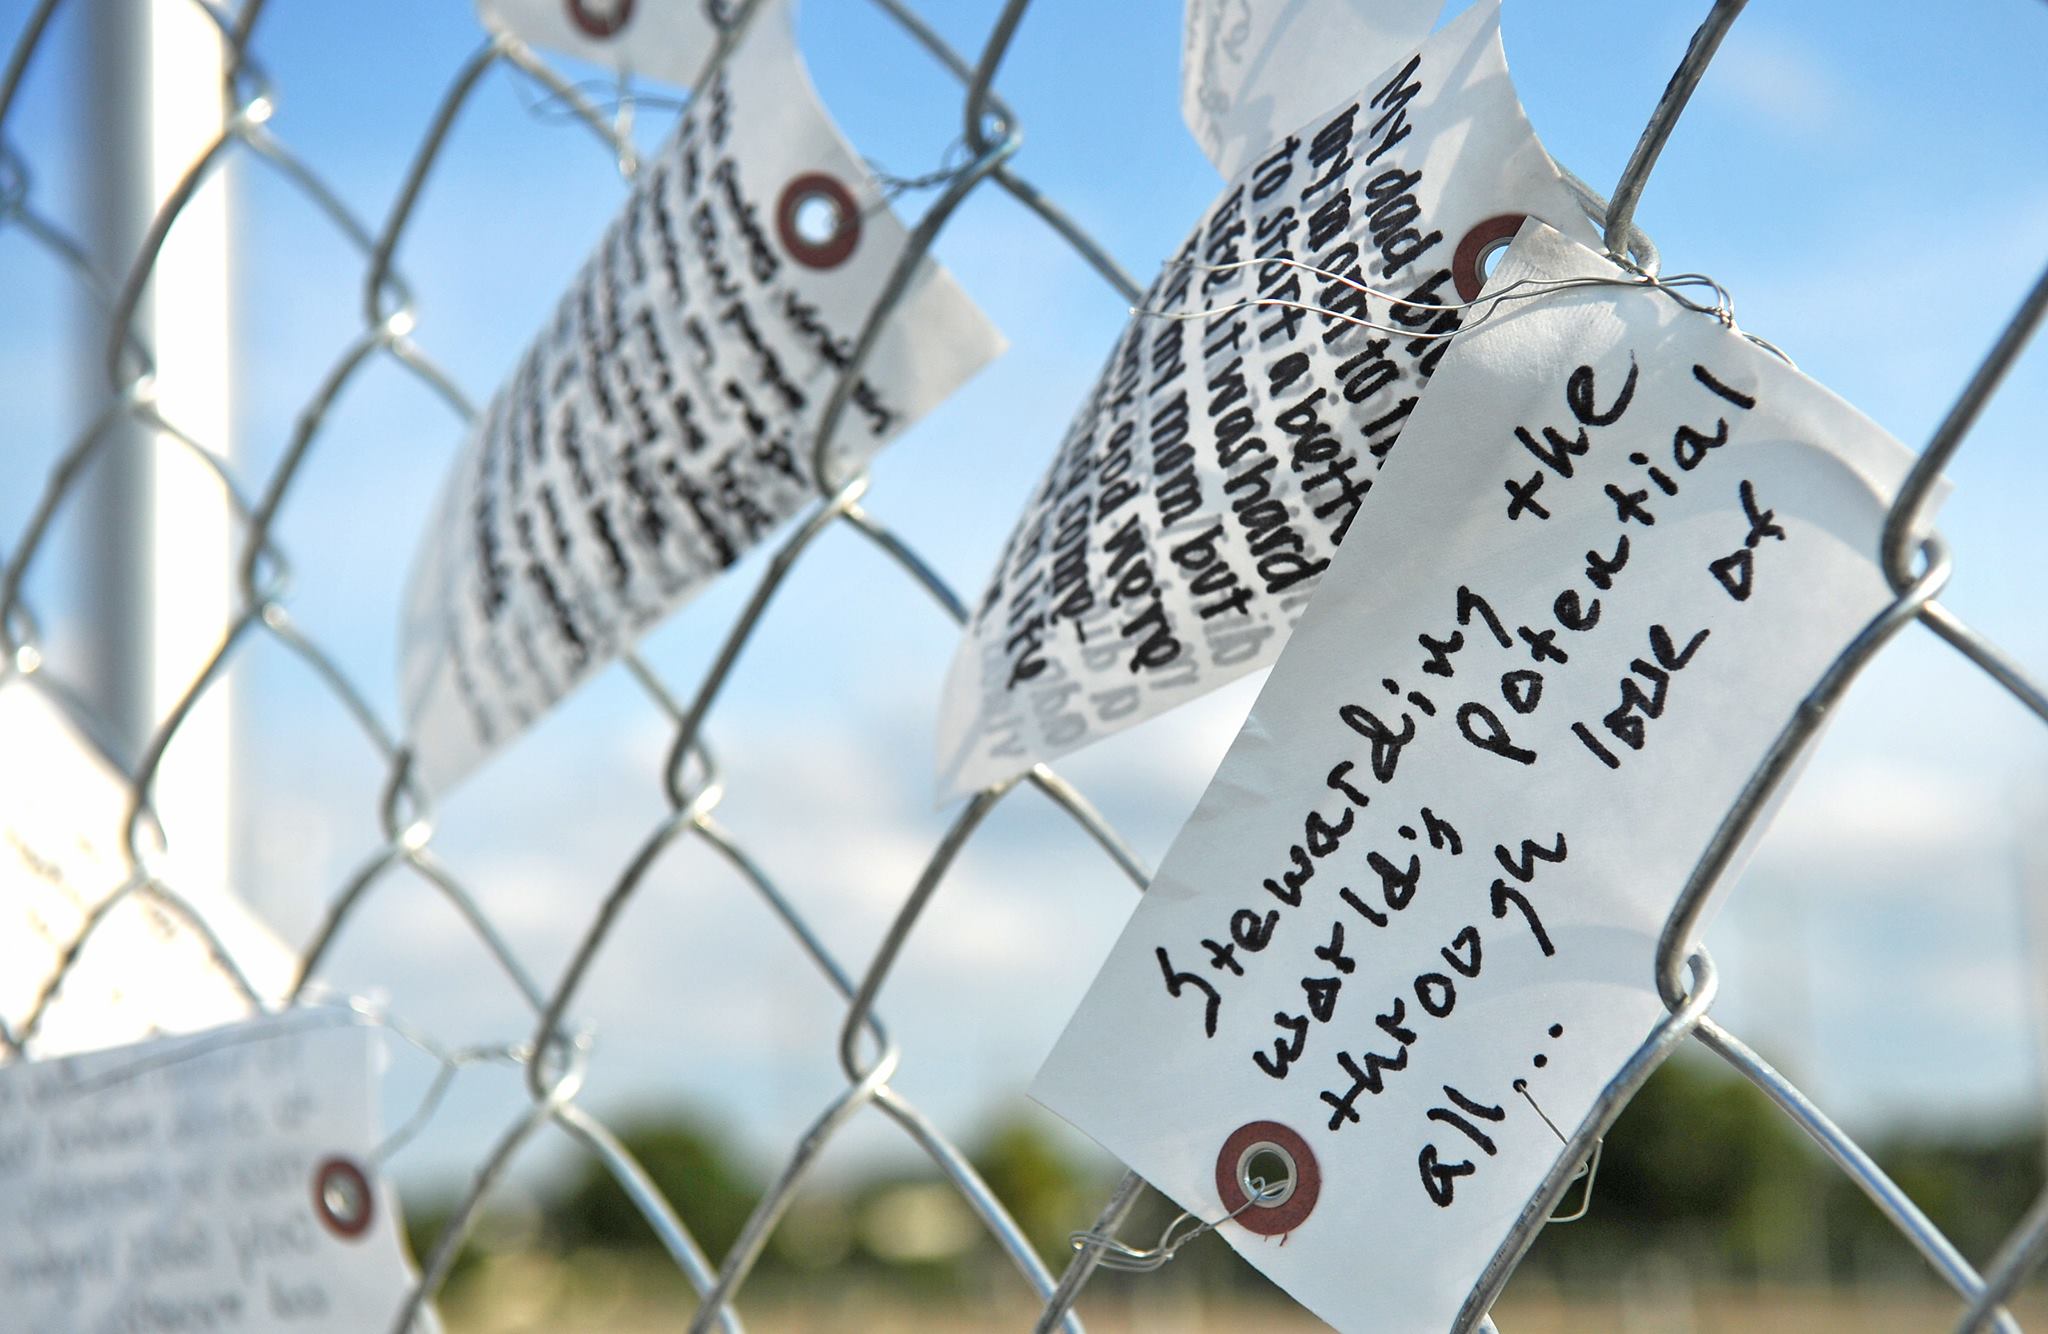 Barrier Free Project image features fence with hand written note attached